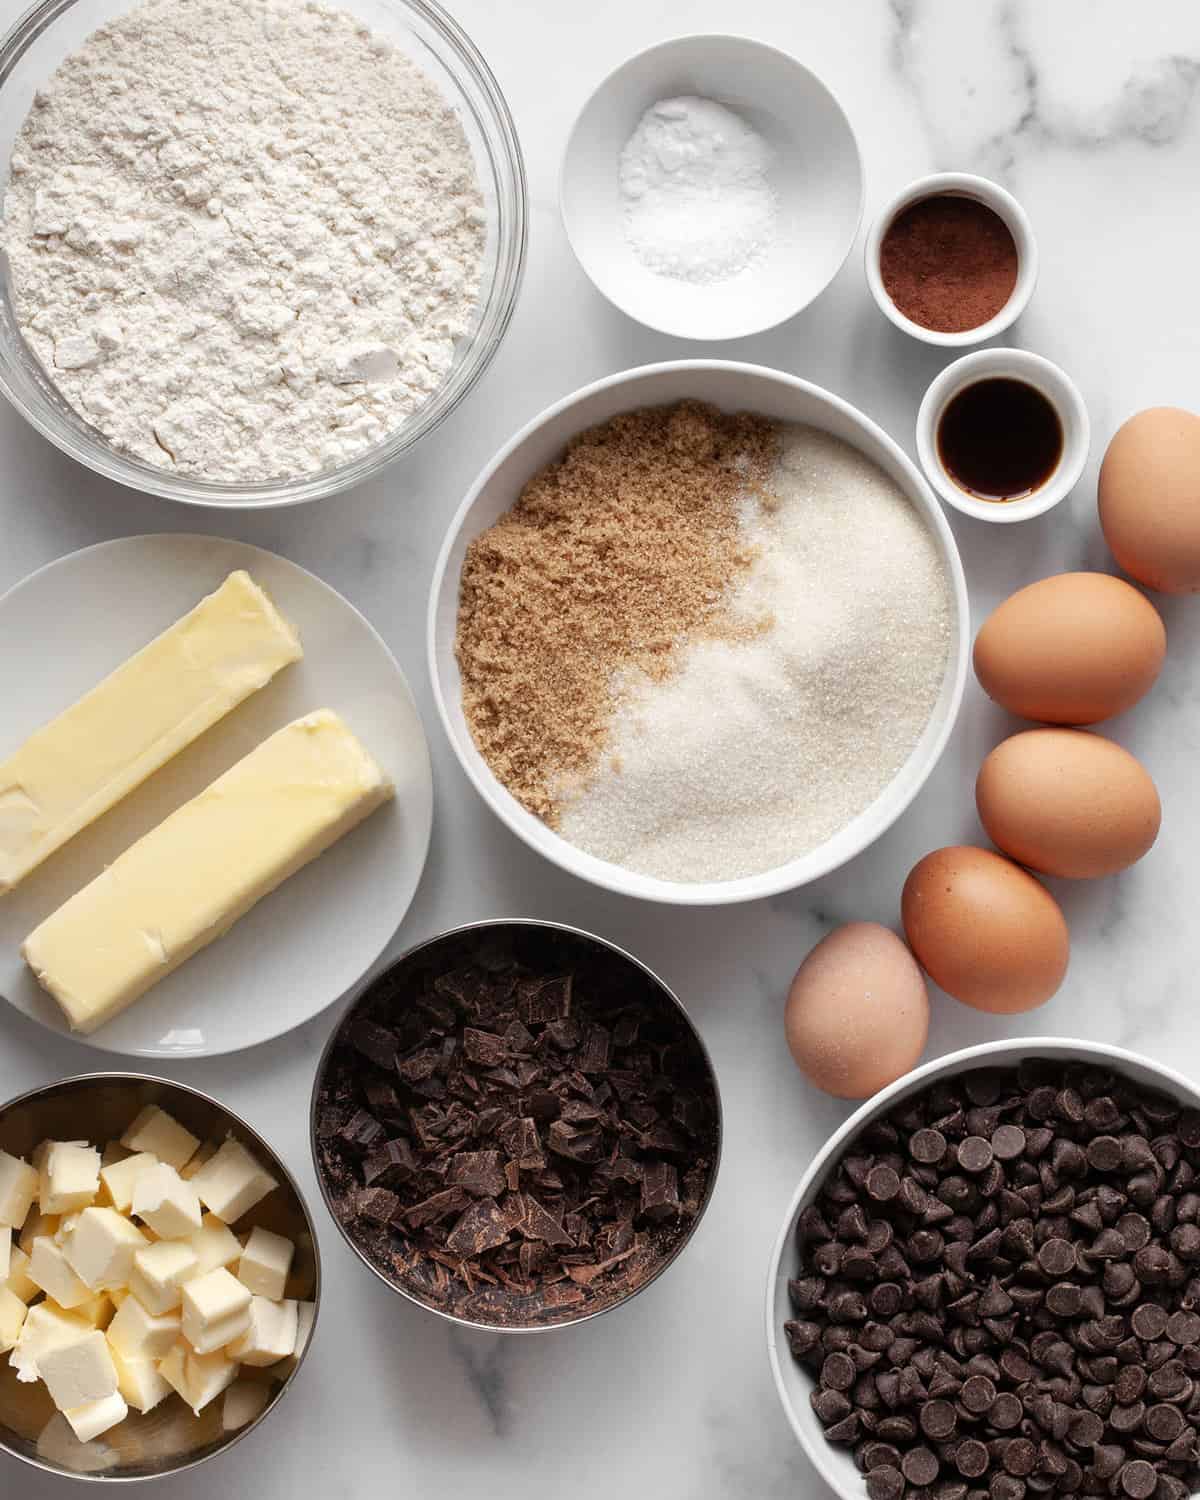 Ingredients including flour, salt, baking soda, butter, brown sugar, granulated sugar, eggs, vanilla extract and chocolate chips, cocoa powder and bittersweet chocolate